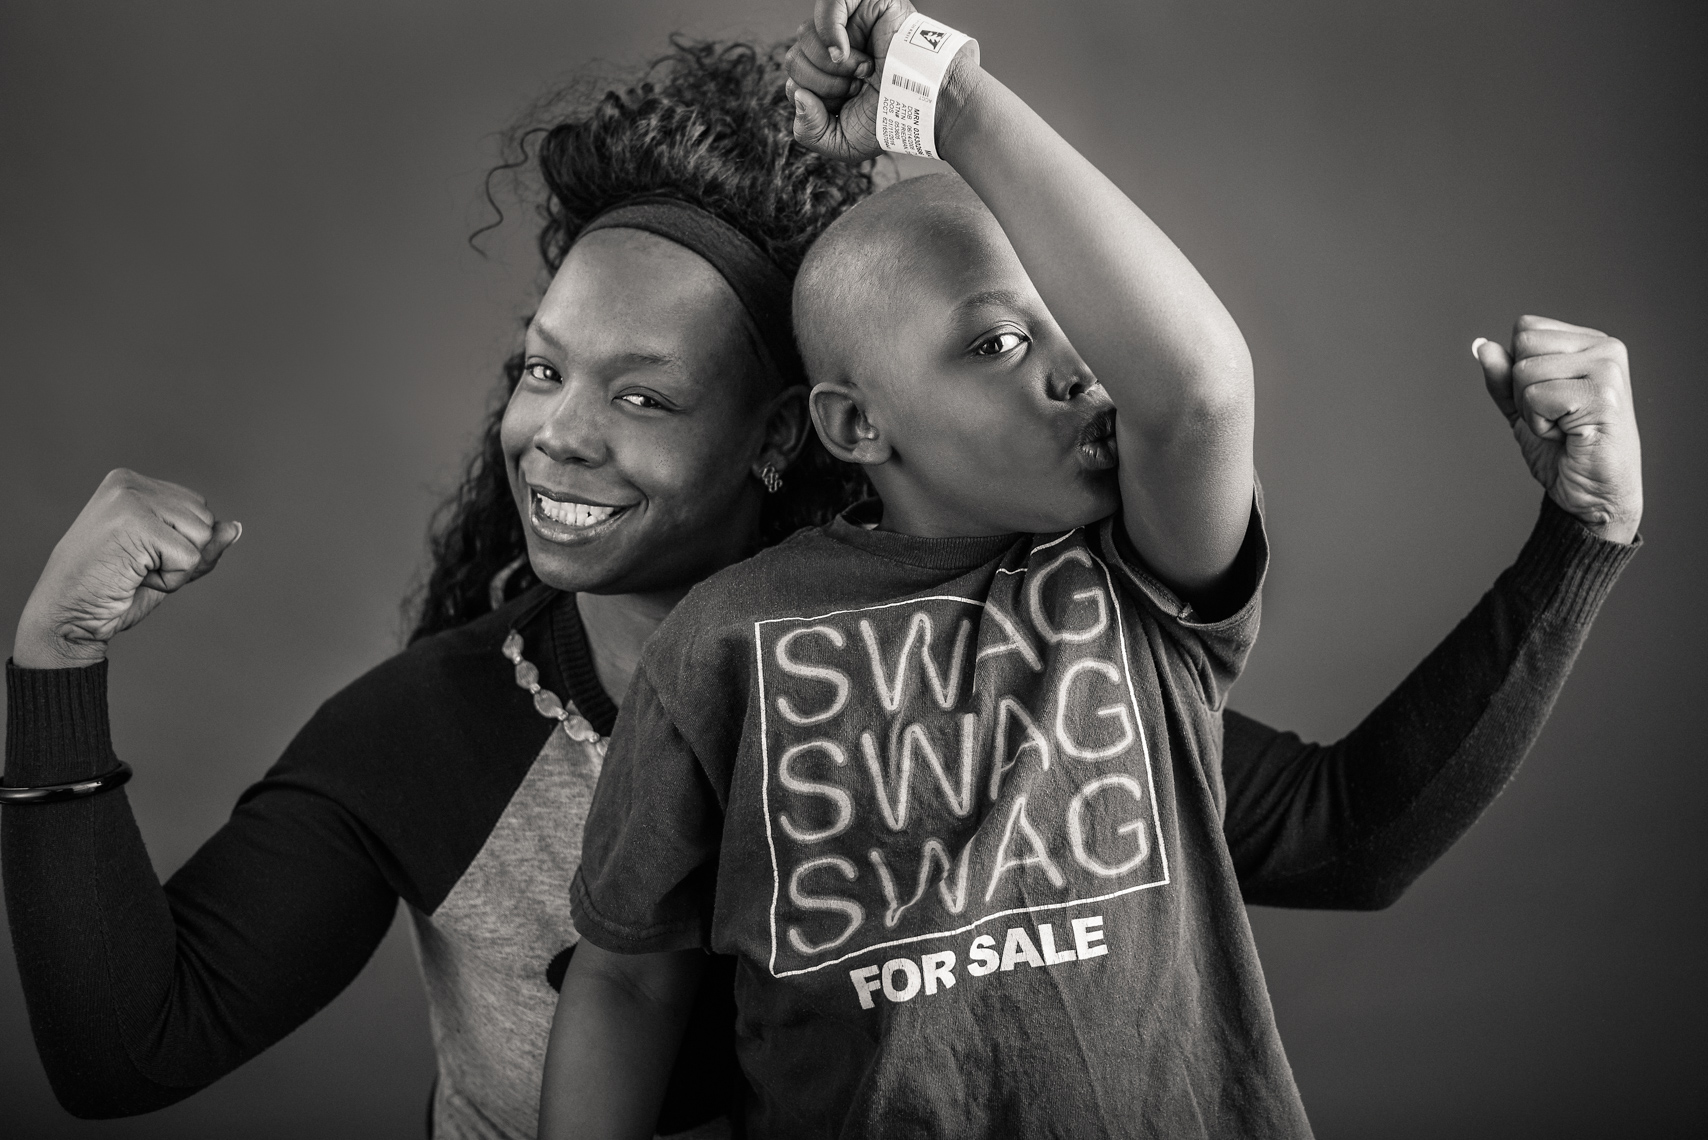 Flashes of Hope, a portrait of strength, a mother with her son who is battling cancer. Resilience, authentic, silly, fun, happy, strength, hope, love, support, together, portrait, editorial, reportage, news, photographer, portraiture